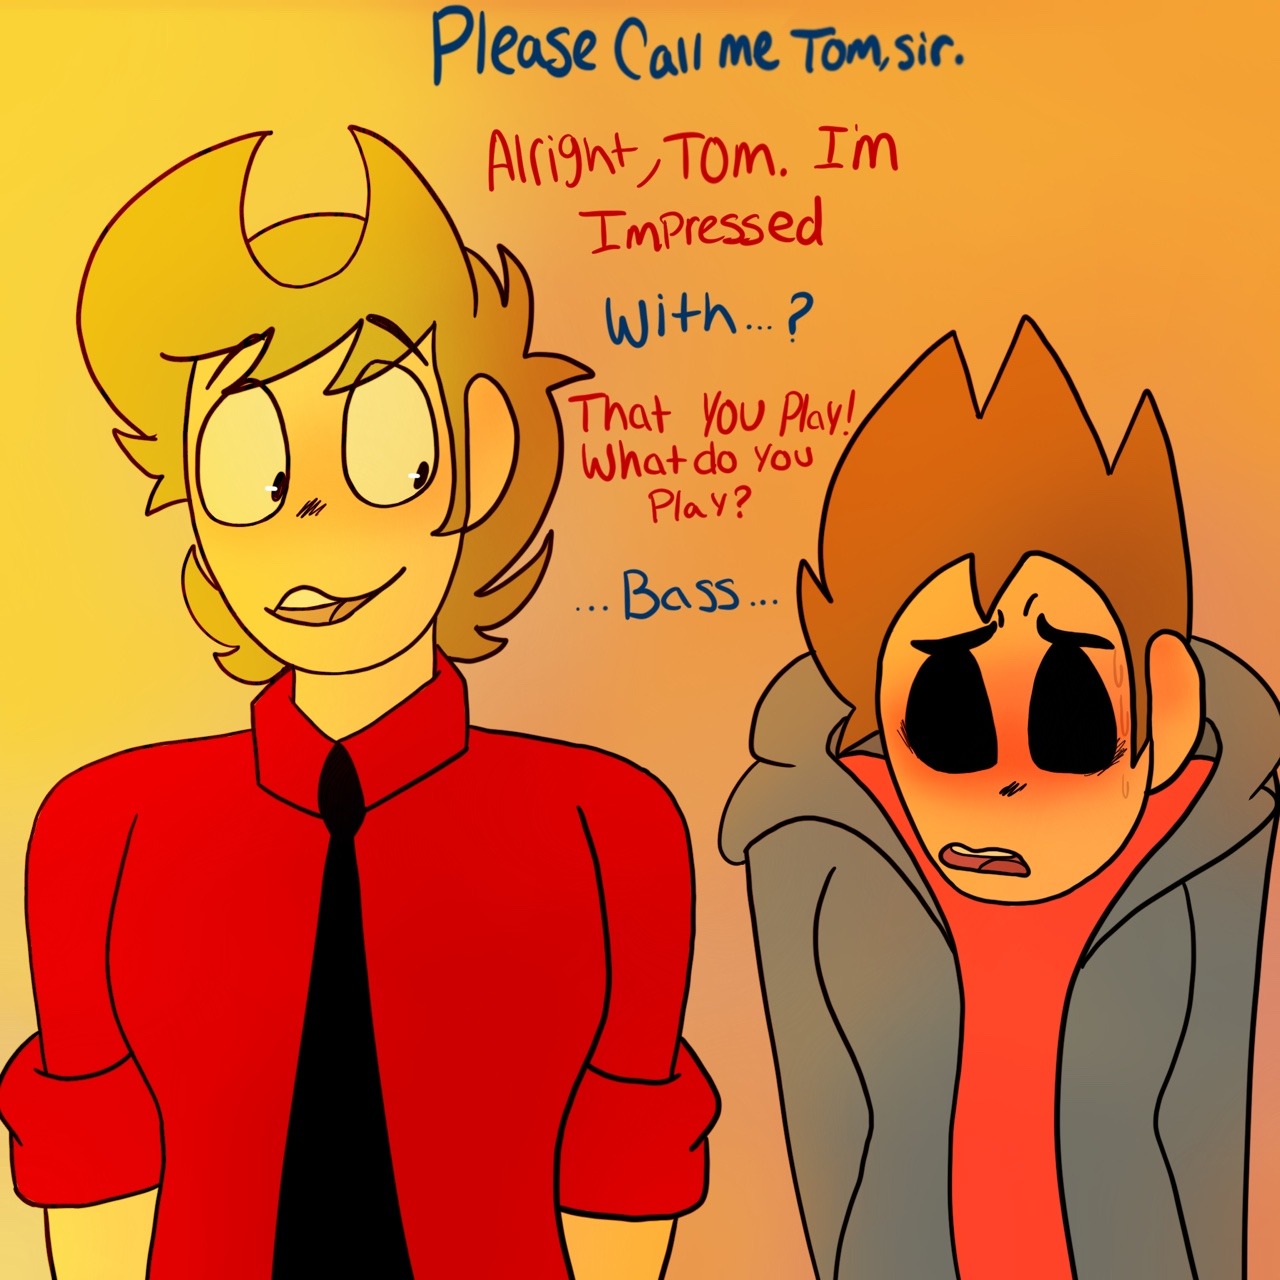 What did Tom call Tord?